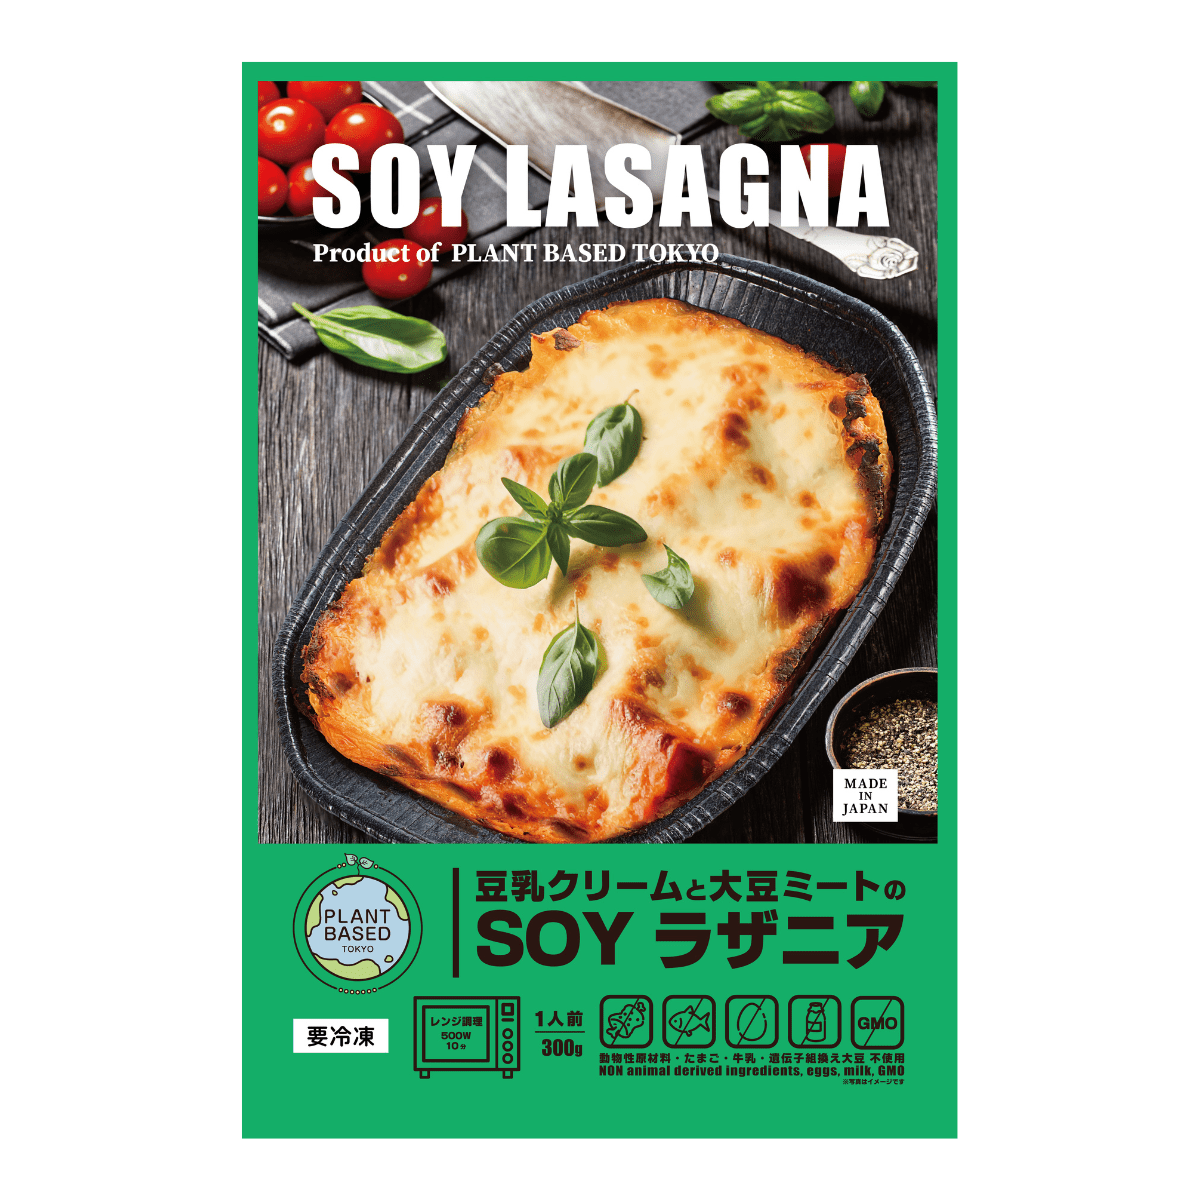 SOY LASAGNA made with soy cream & soy meat DKINT - Tokyo Fresh Direct